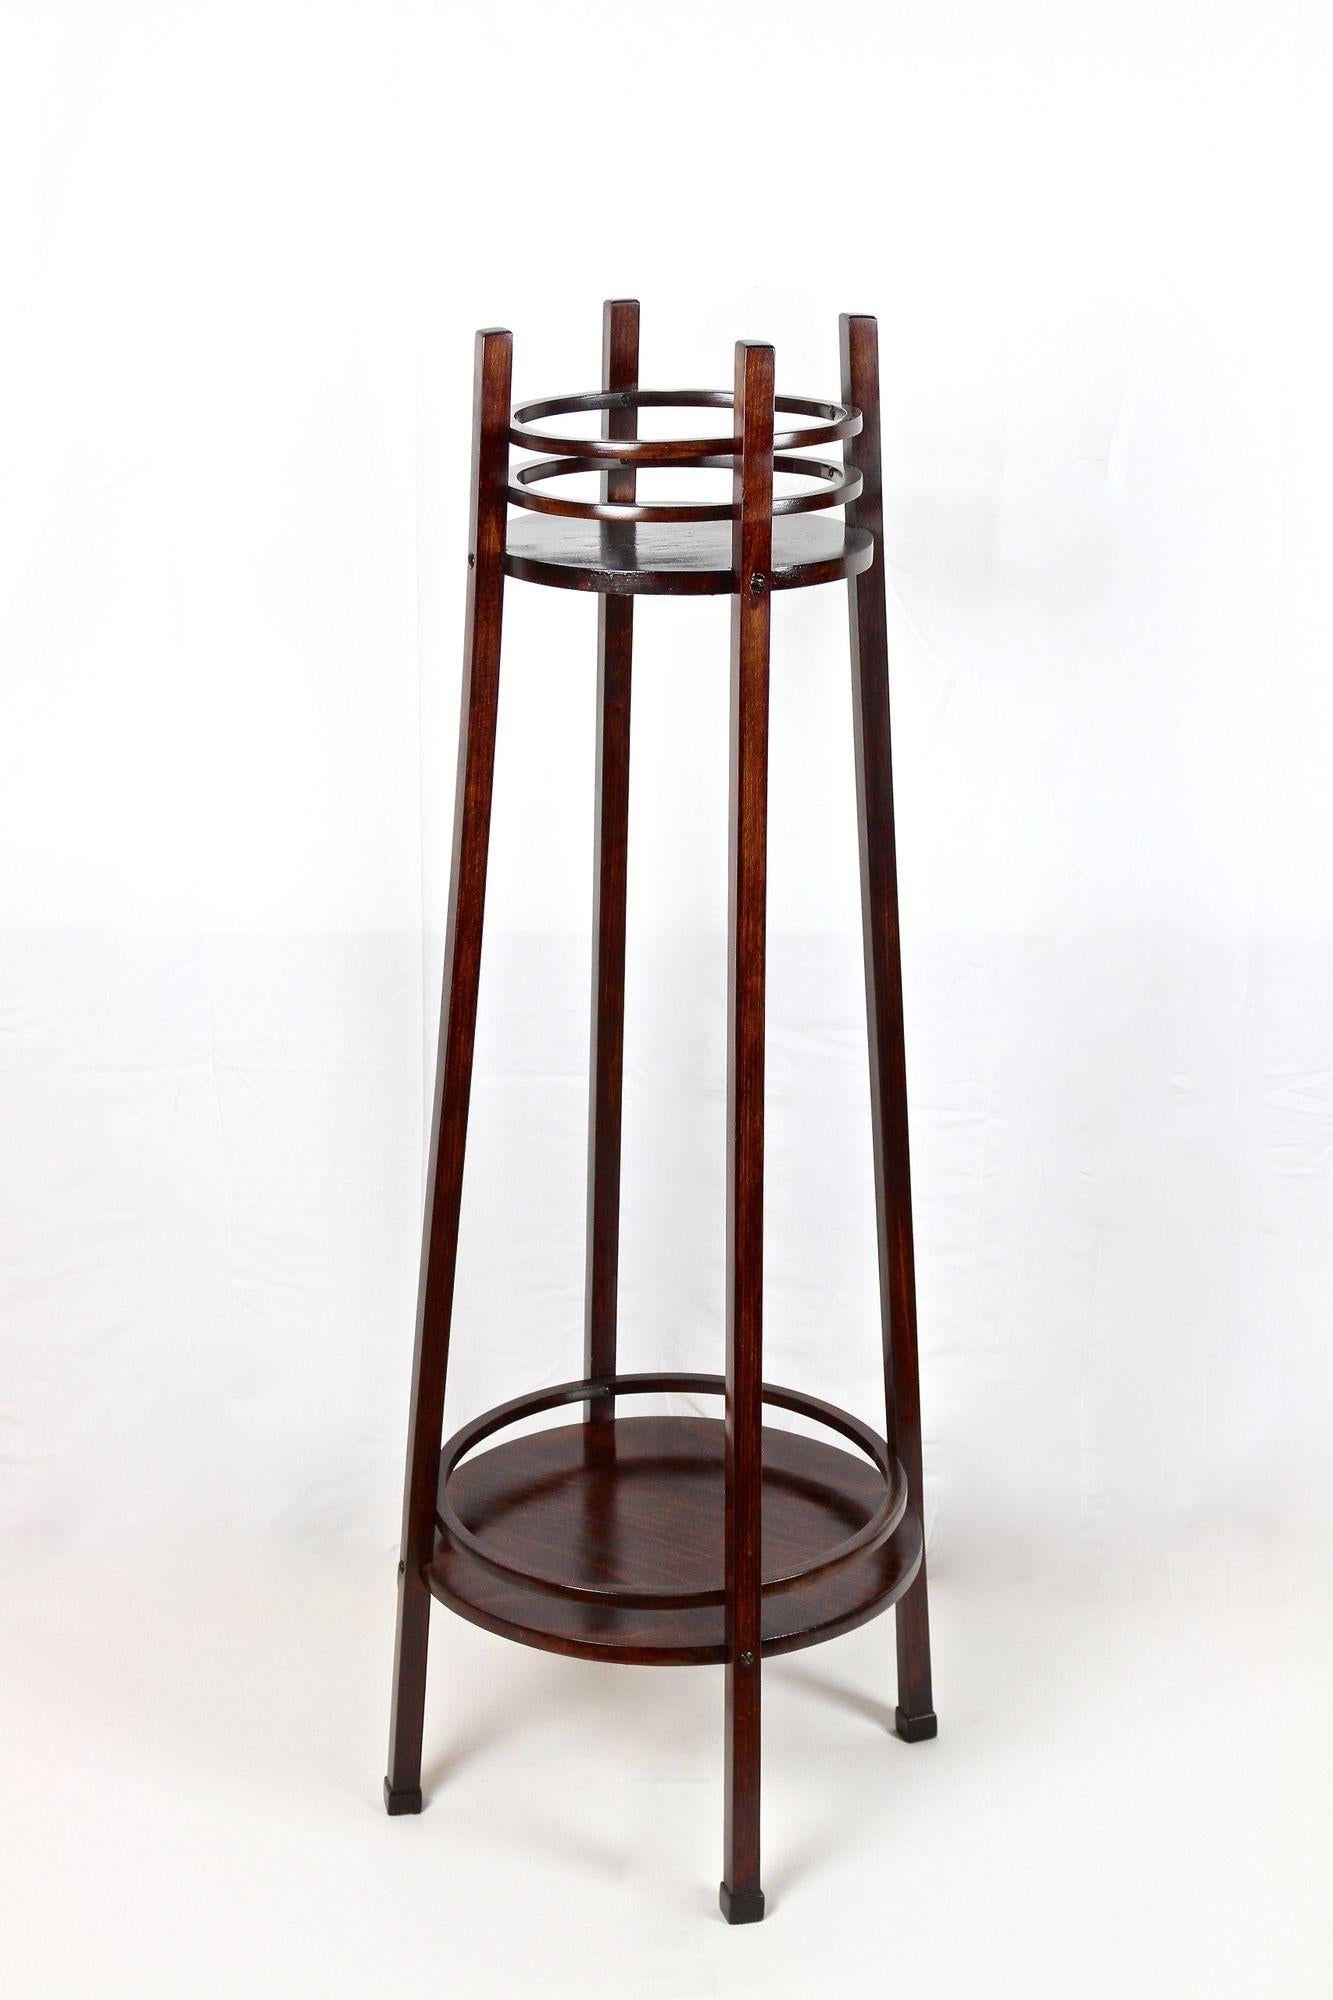 Awesome Art Nouveau bentwood pedestal from the renowned company of Thonet Vienna around 1906. This outstanding designed flower stand Mod.Nr. 9531 provides two round levels, connected by four slim elegant beechwood columns. The upper section is